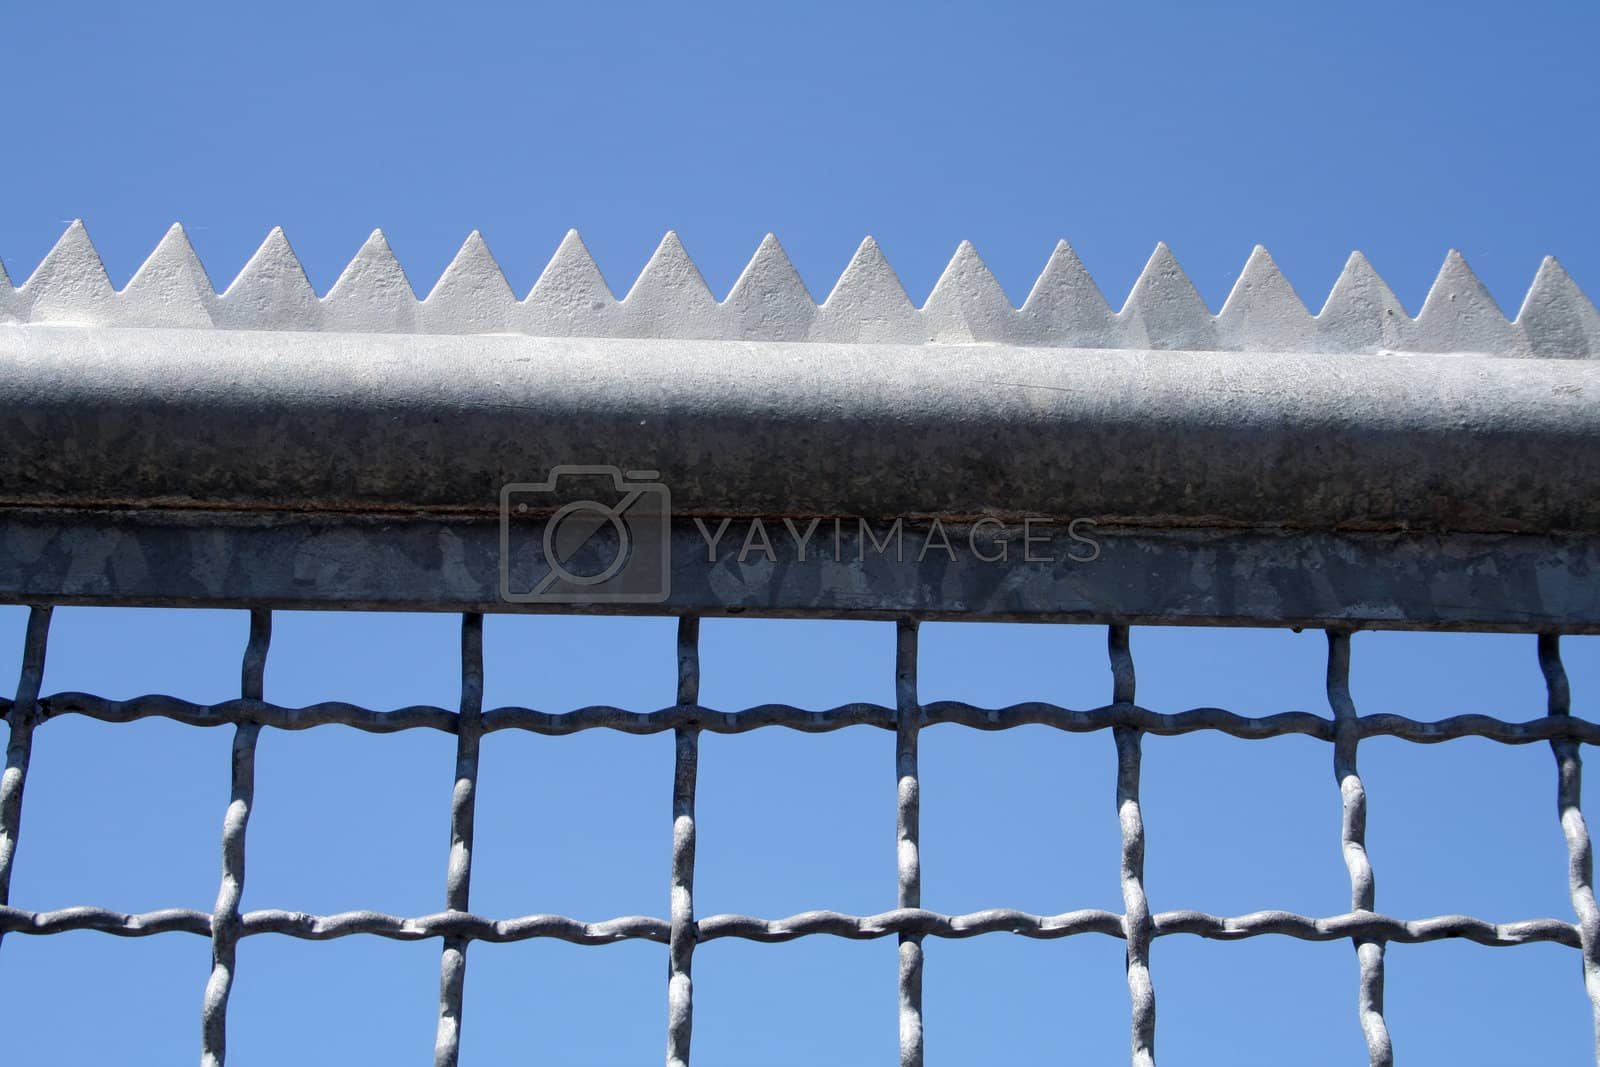 Royalty free image of fence by Hasenonkel